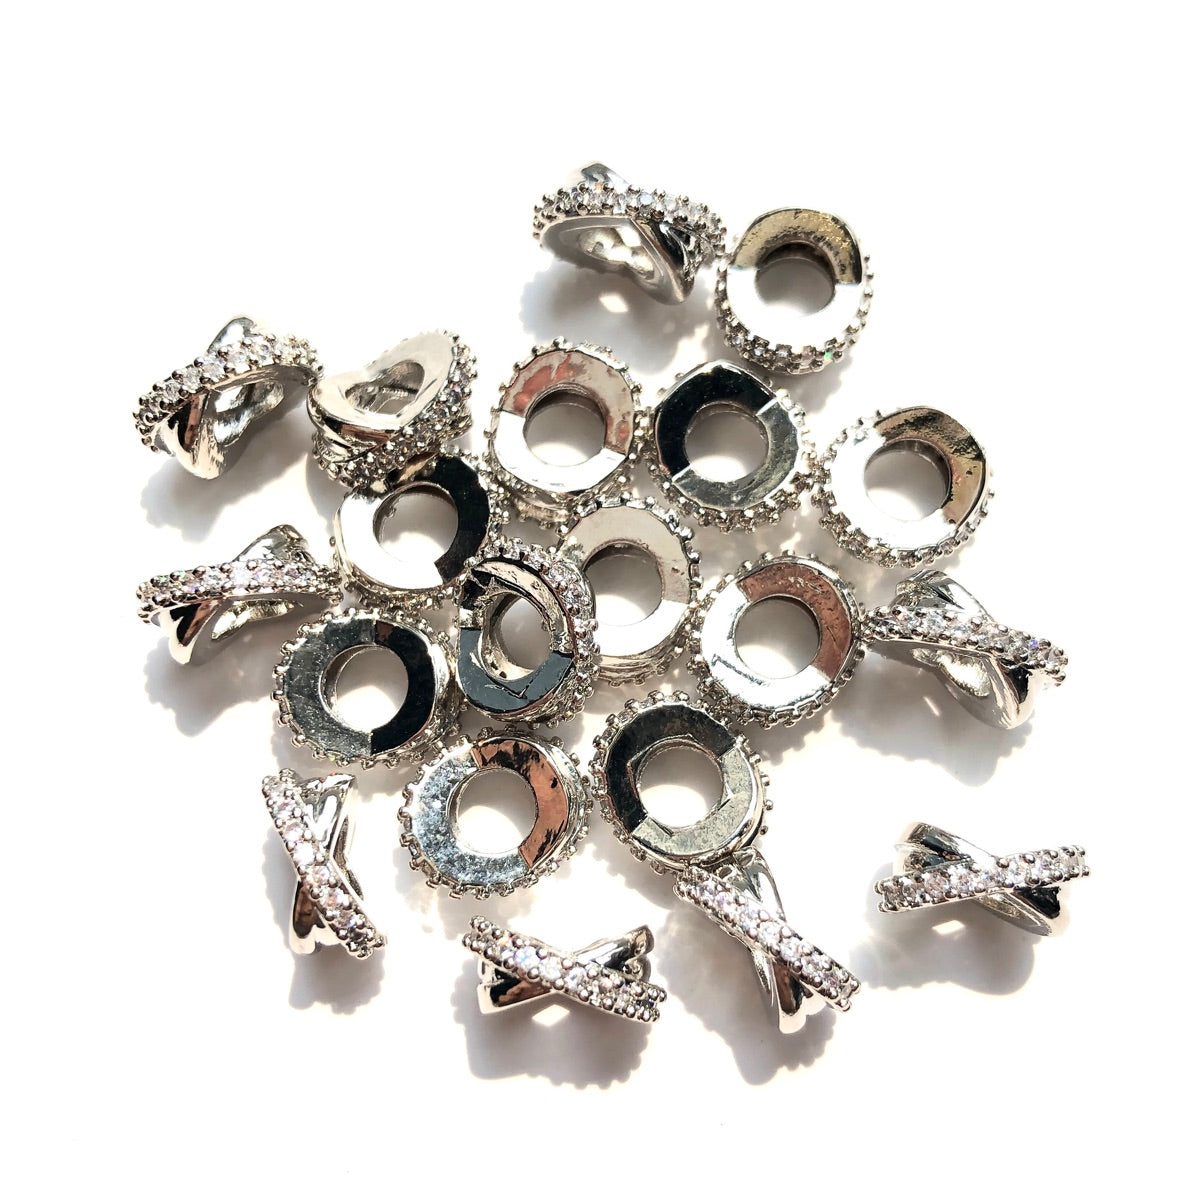 20-50pcs/lot 10*4.5mm CZ Paved Big Hole Rondelle Wheel Spacers Silver CZ Paved Spacers New Spacers Arrivals Rondelle Beads Wholesale Charms Beads Beyond